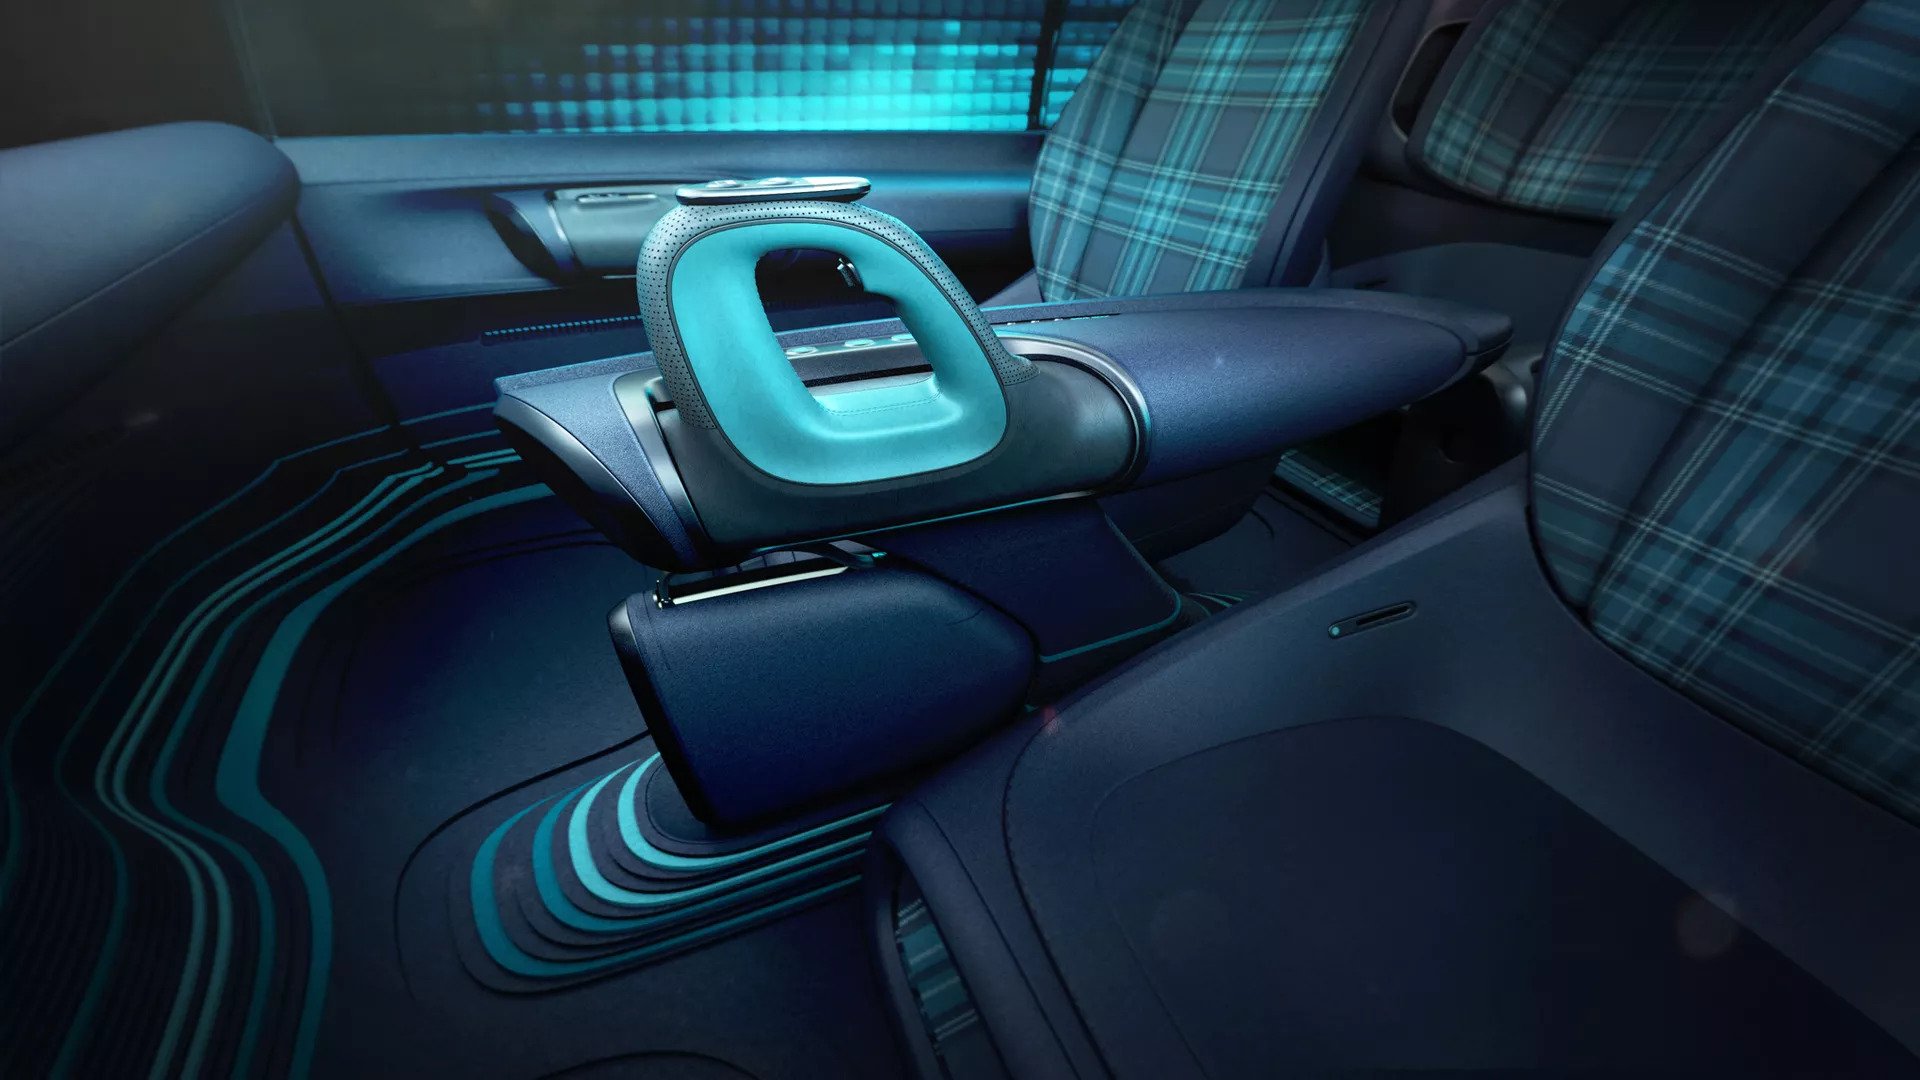 Hyundai Motor Prophecy Concept Electric Vehicle